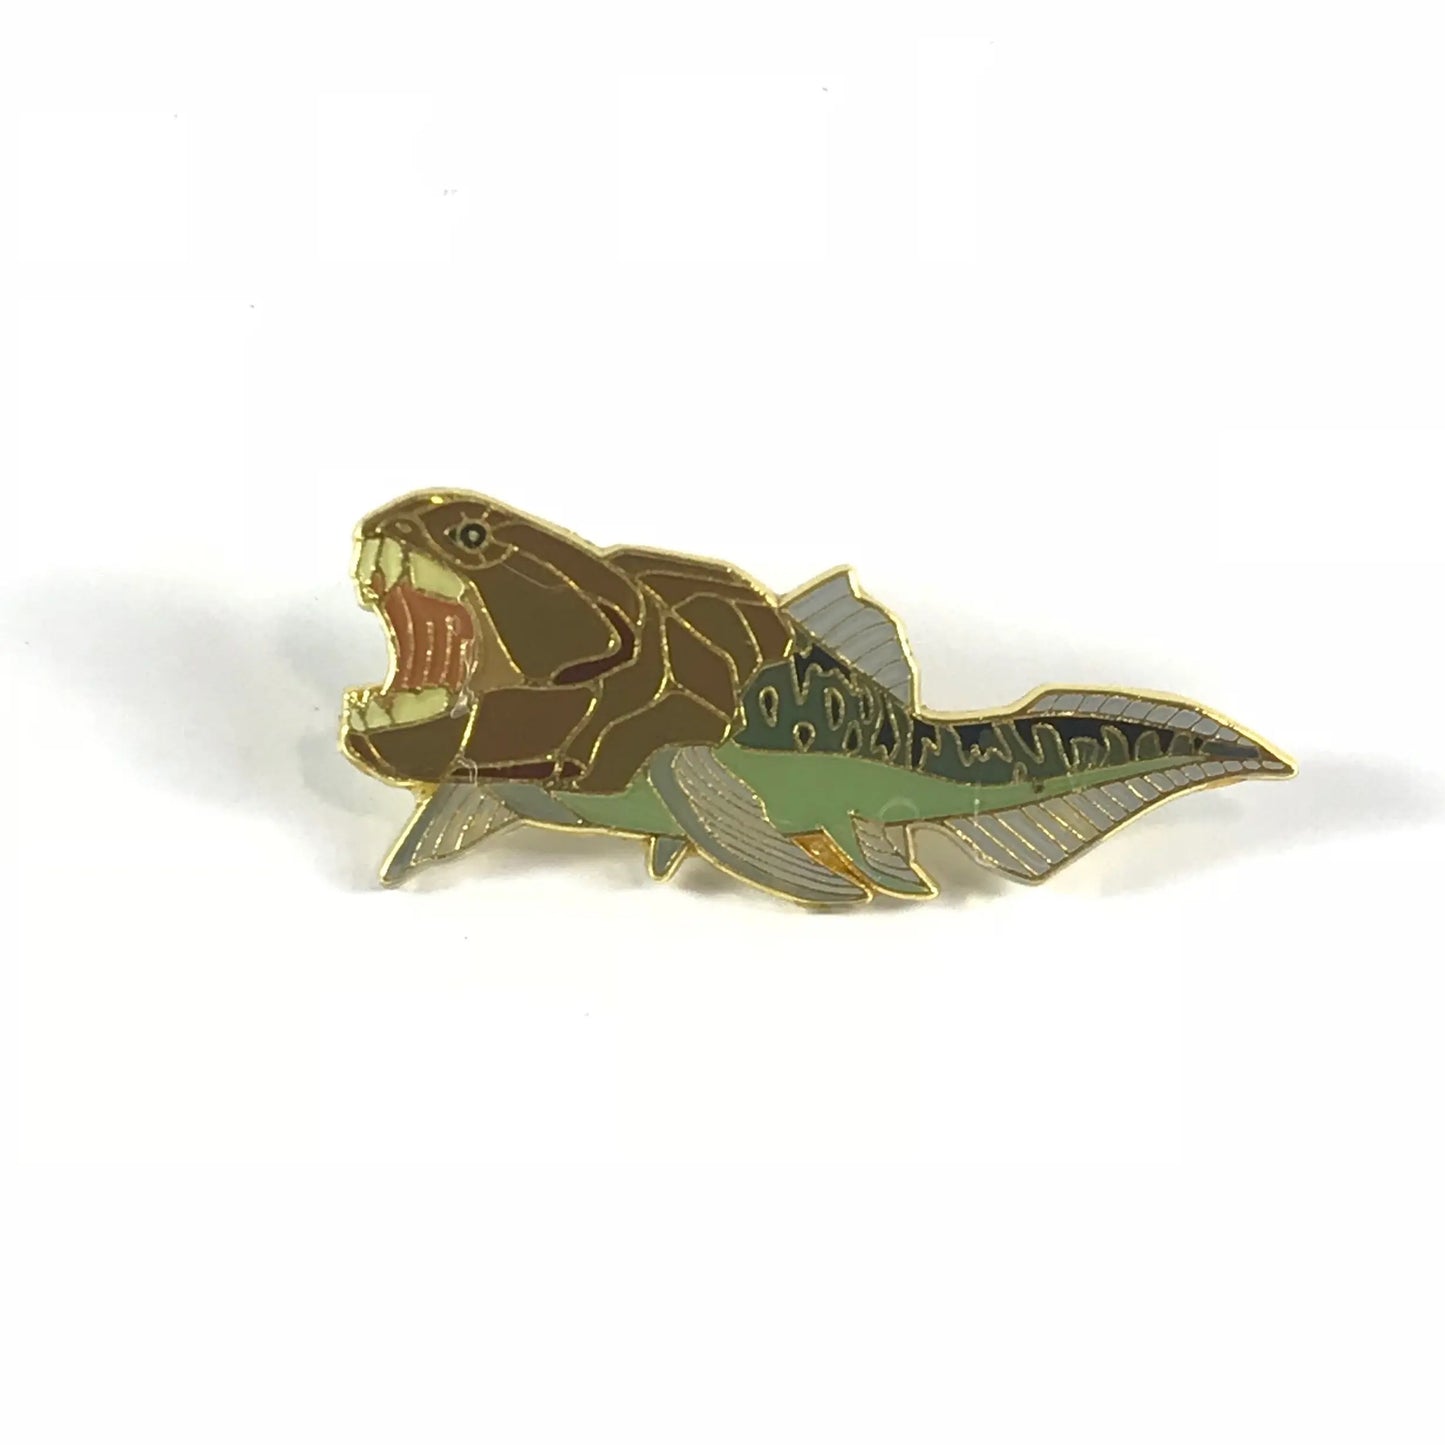 Dunkleosteus Pin - Stemcell Science Shop